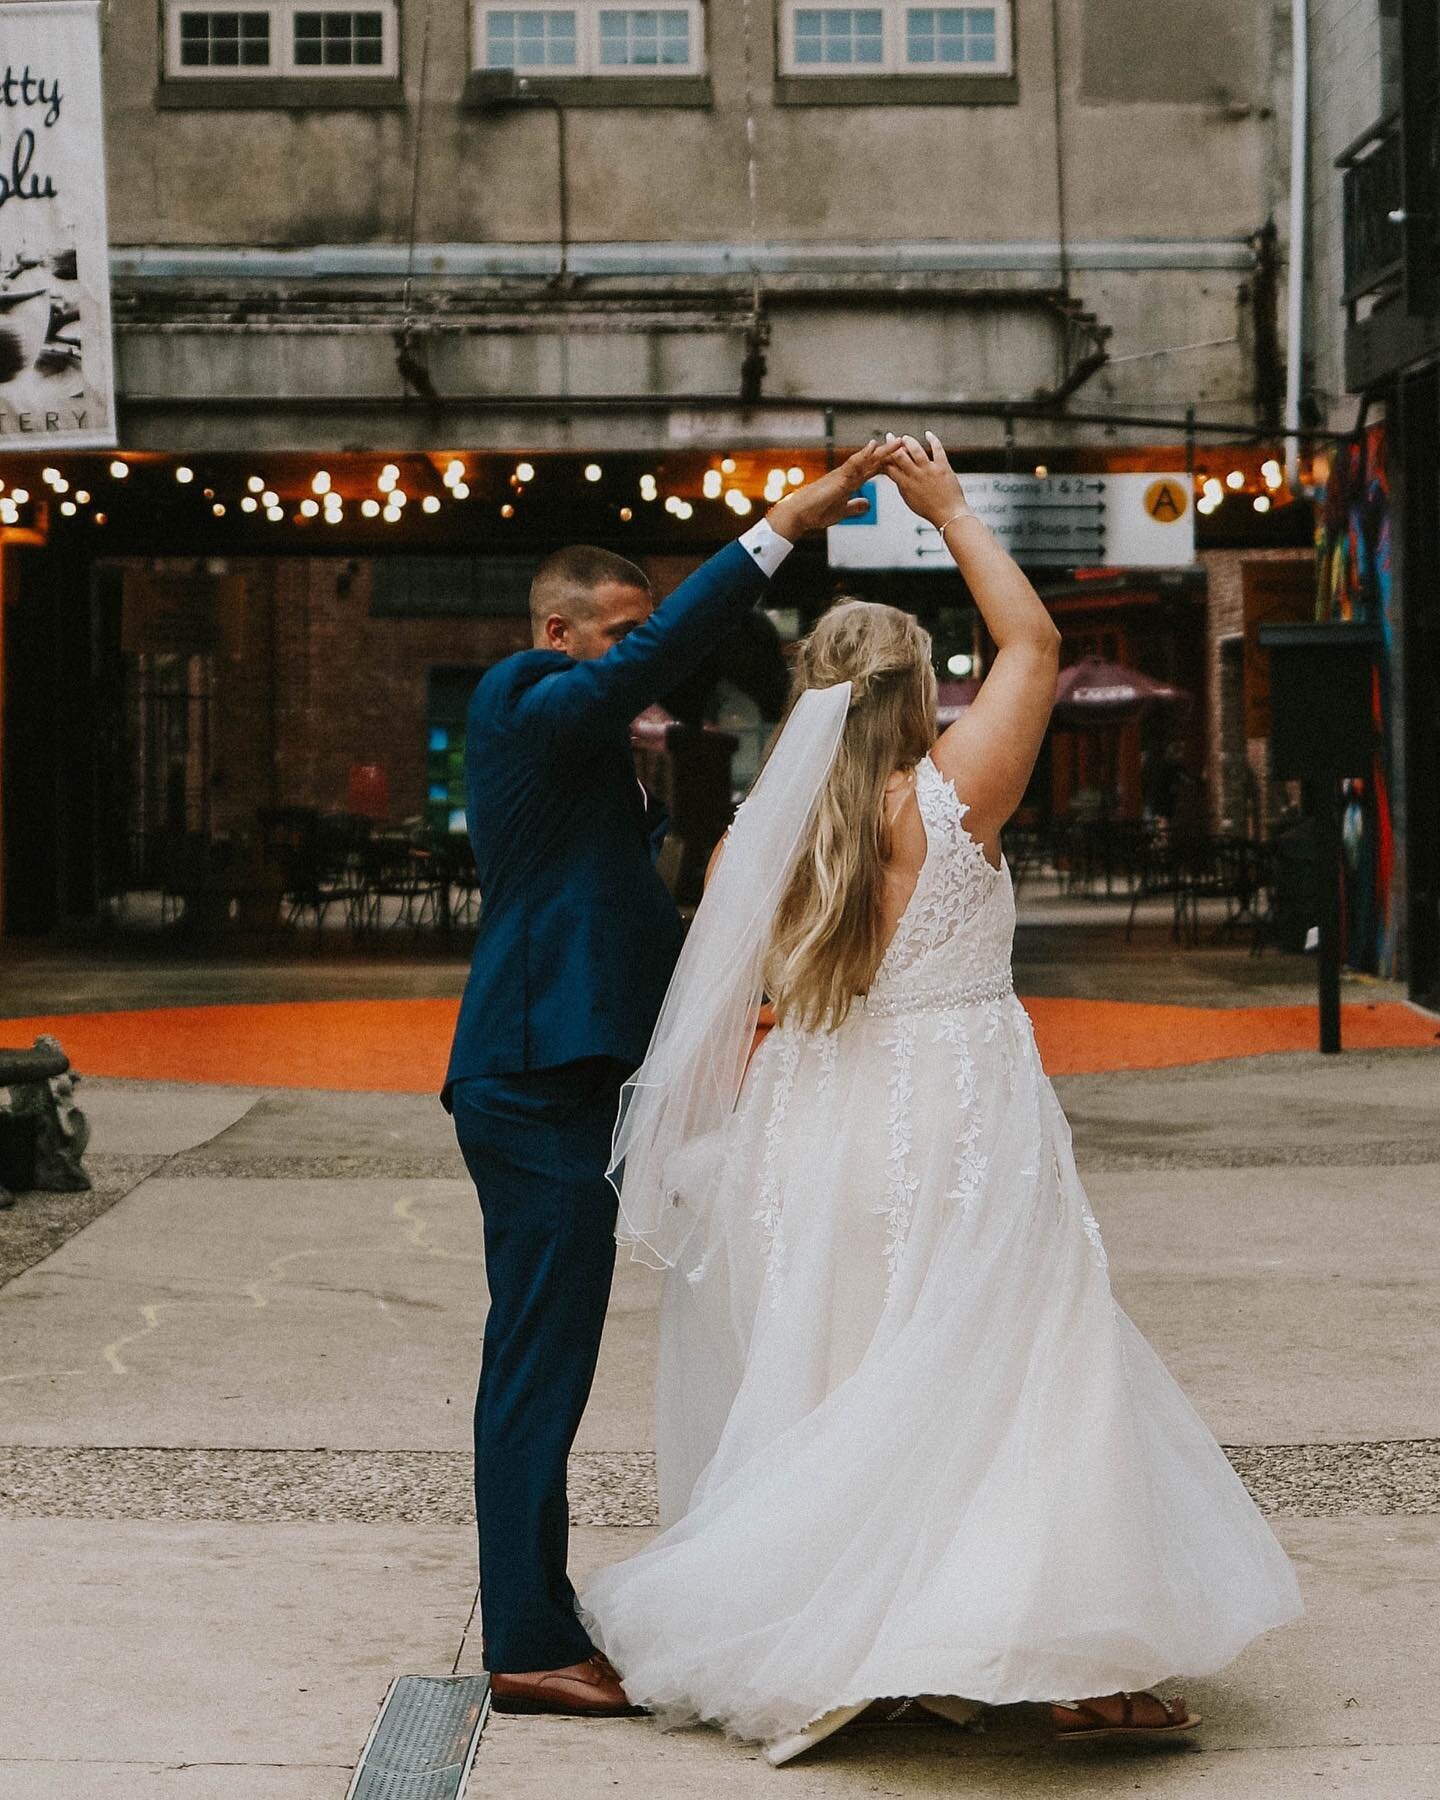 Twirling into the week like.... here are some fun stills from the video I shot from Marley + Austin&rsquo;s wedding! Congratulations to these two lovebirds 😍 
-
-
-
-
#dcphotographer #dcweddingphotographer #dcwedding #dcbride #dcengaged #igdc #annigrahampresets